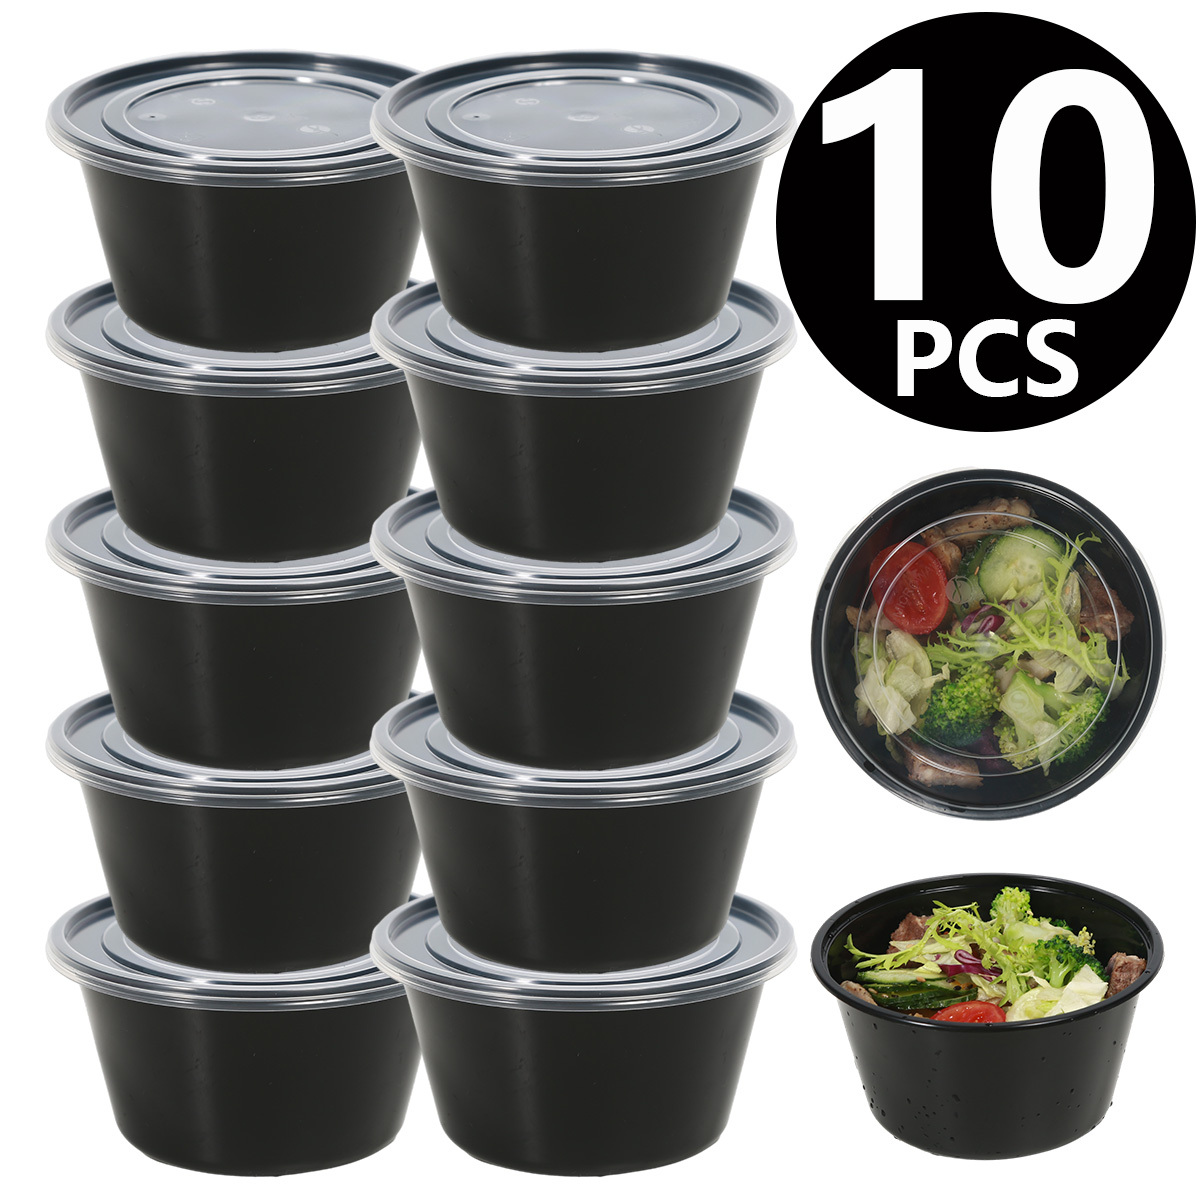 Buy Disposable Food Containers Meal Prep Bowls Plastic Containers